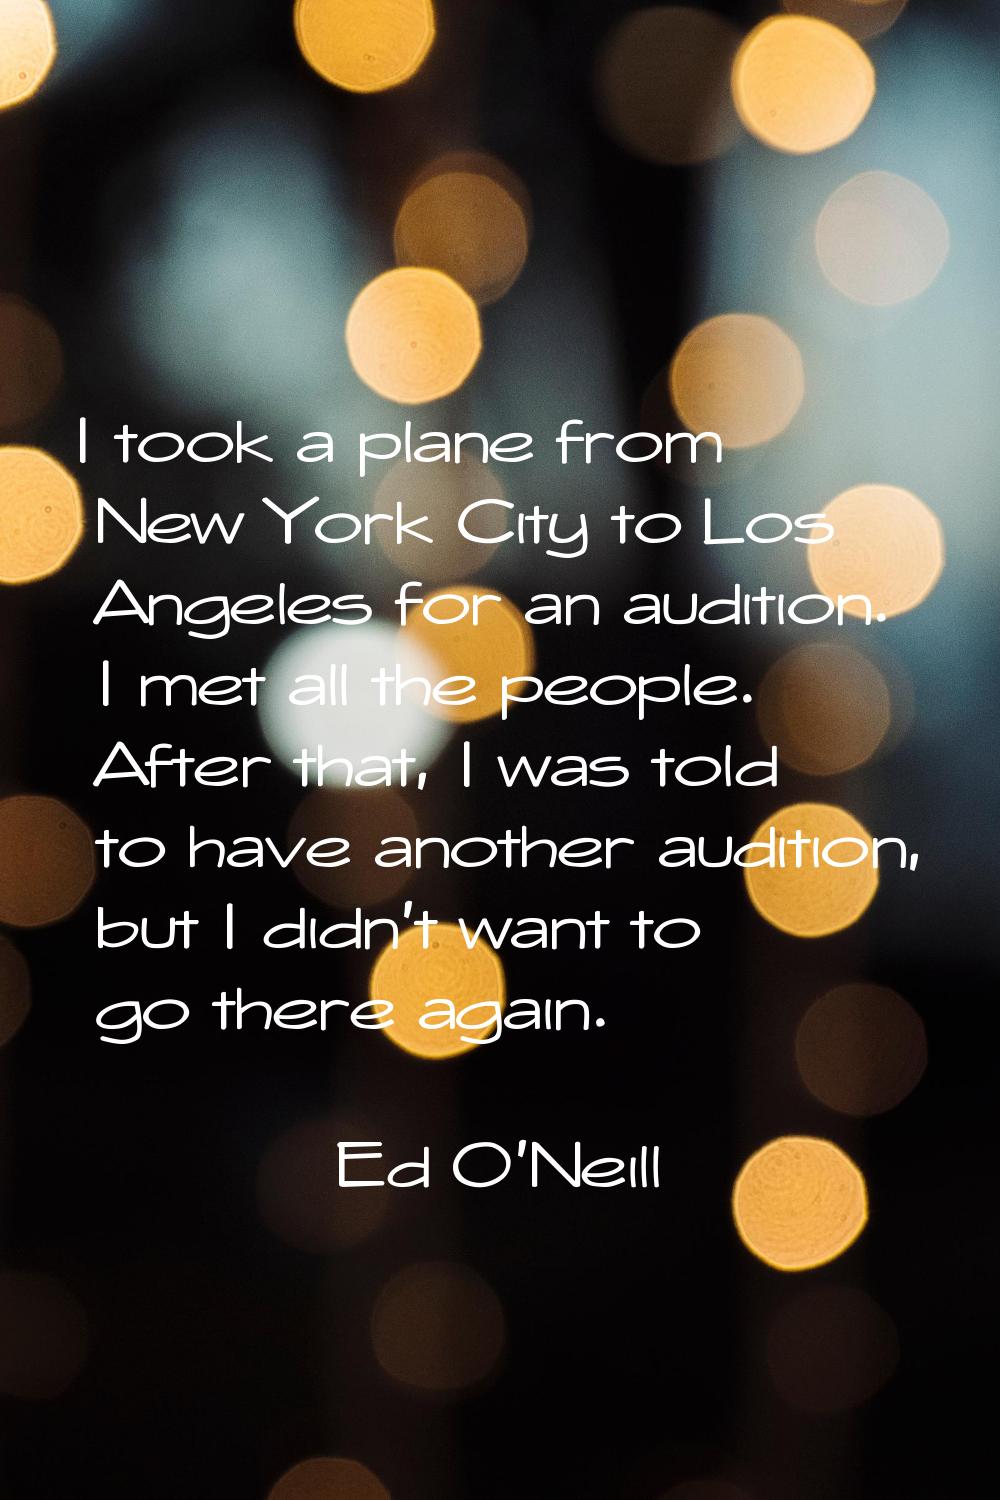 I took a plane from New York City to Los Angeles for an audition. I met all the people. After that,